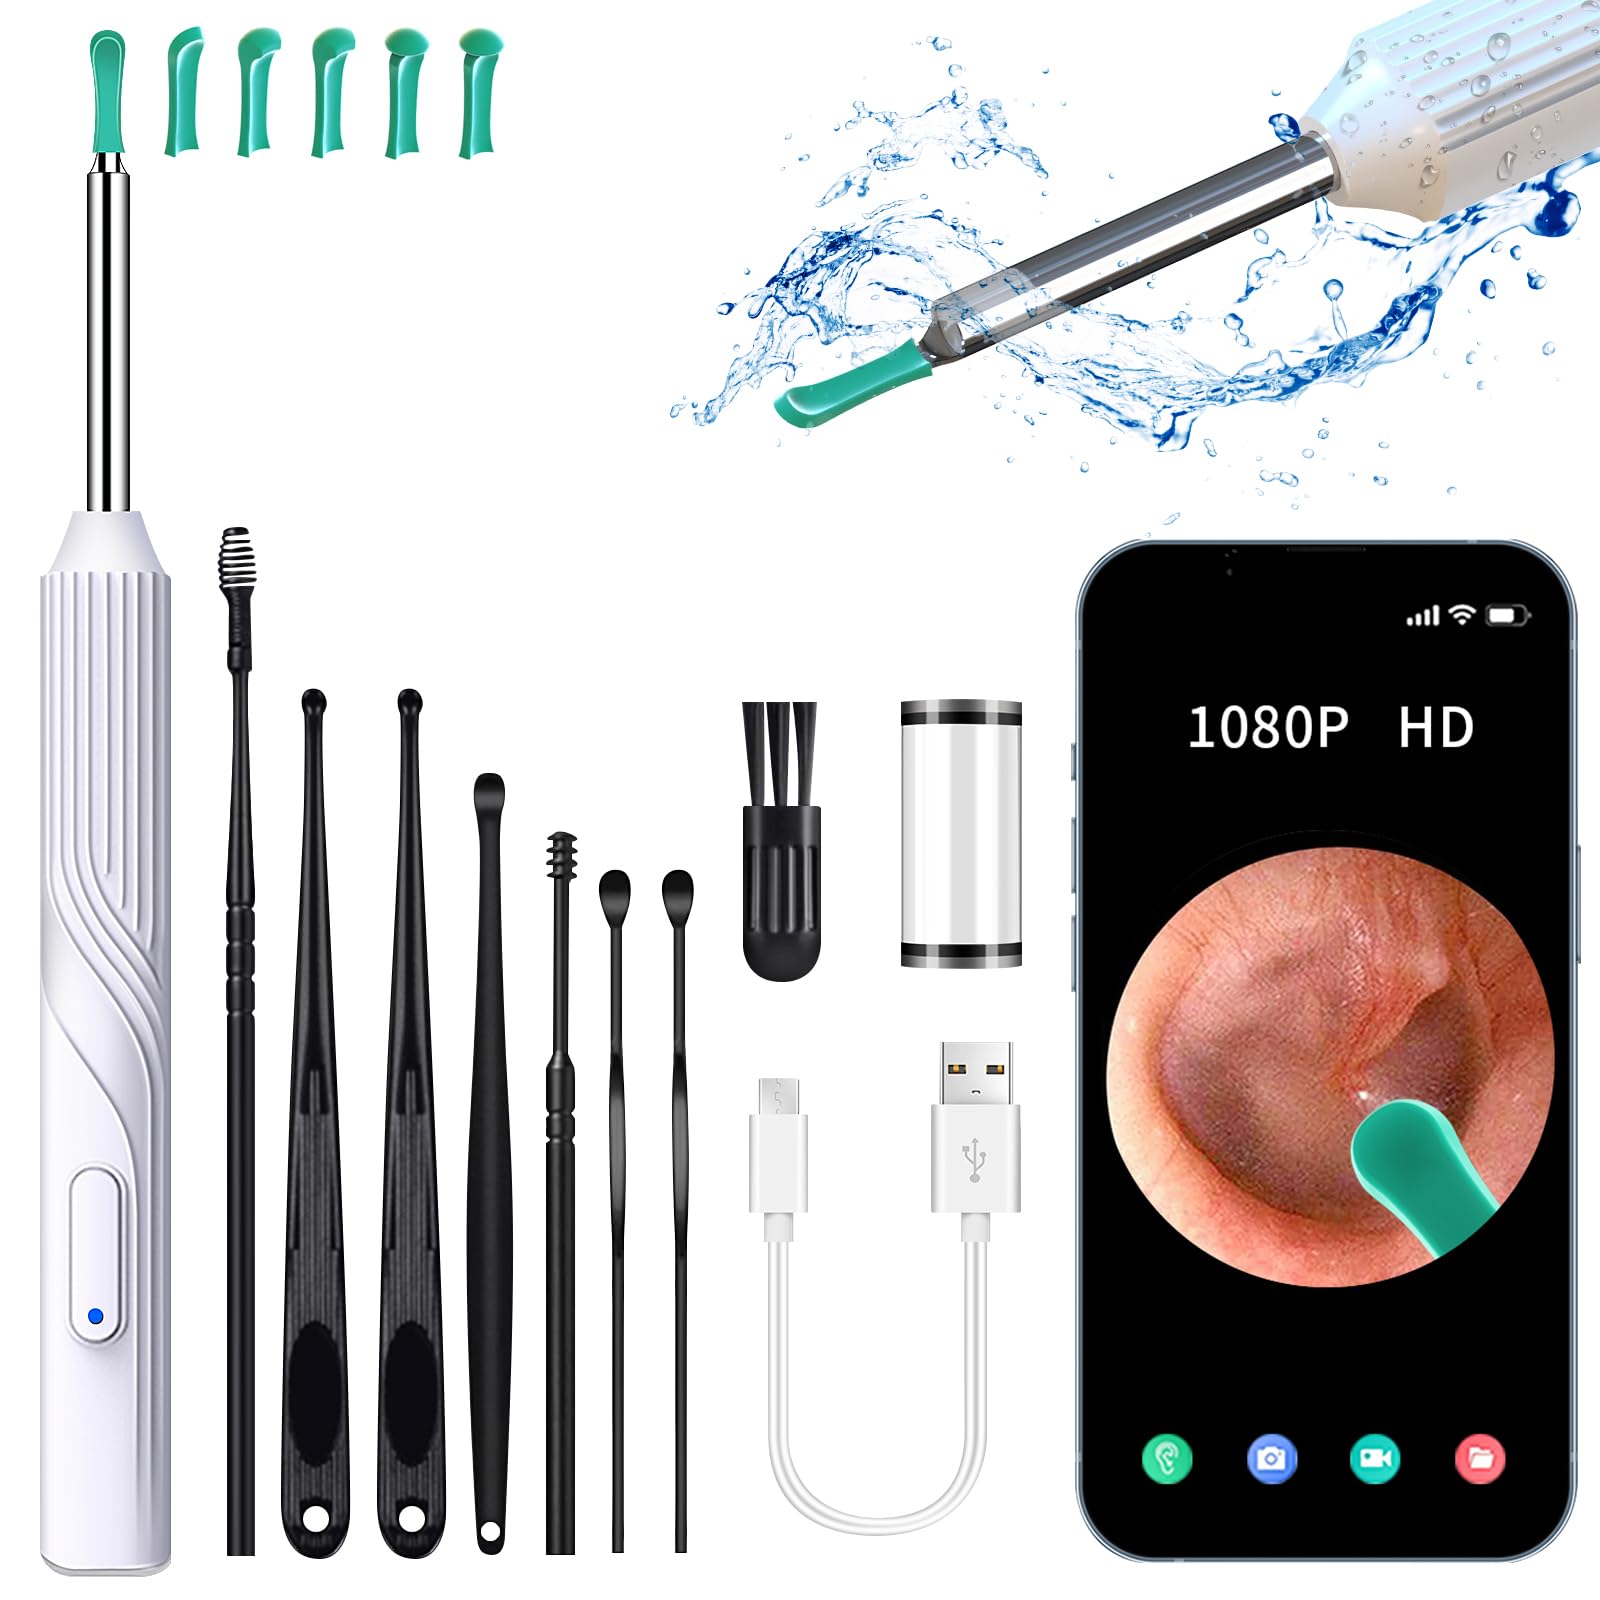 Pro Ear Wax Removal, Ear Cleaner with 1080P HD Otoscope Camera and Light Plus 7Pcs Ear Set for All iPhone and Android Phones